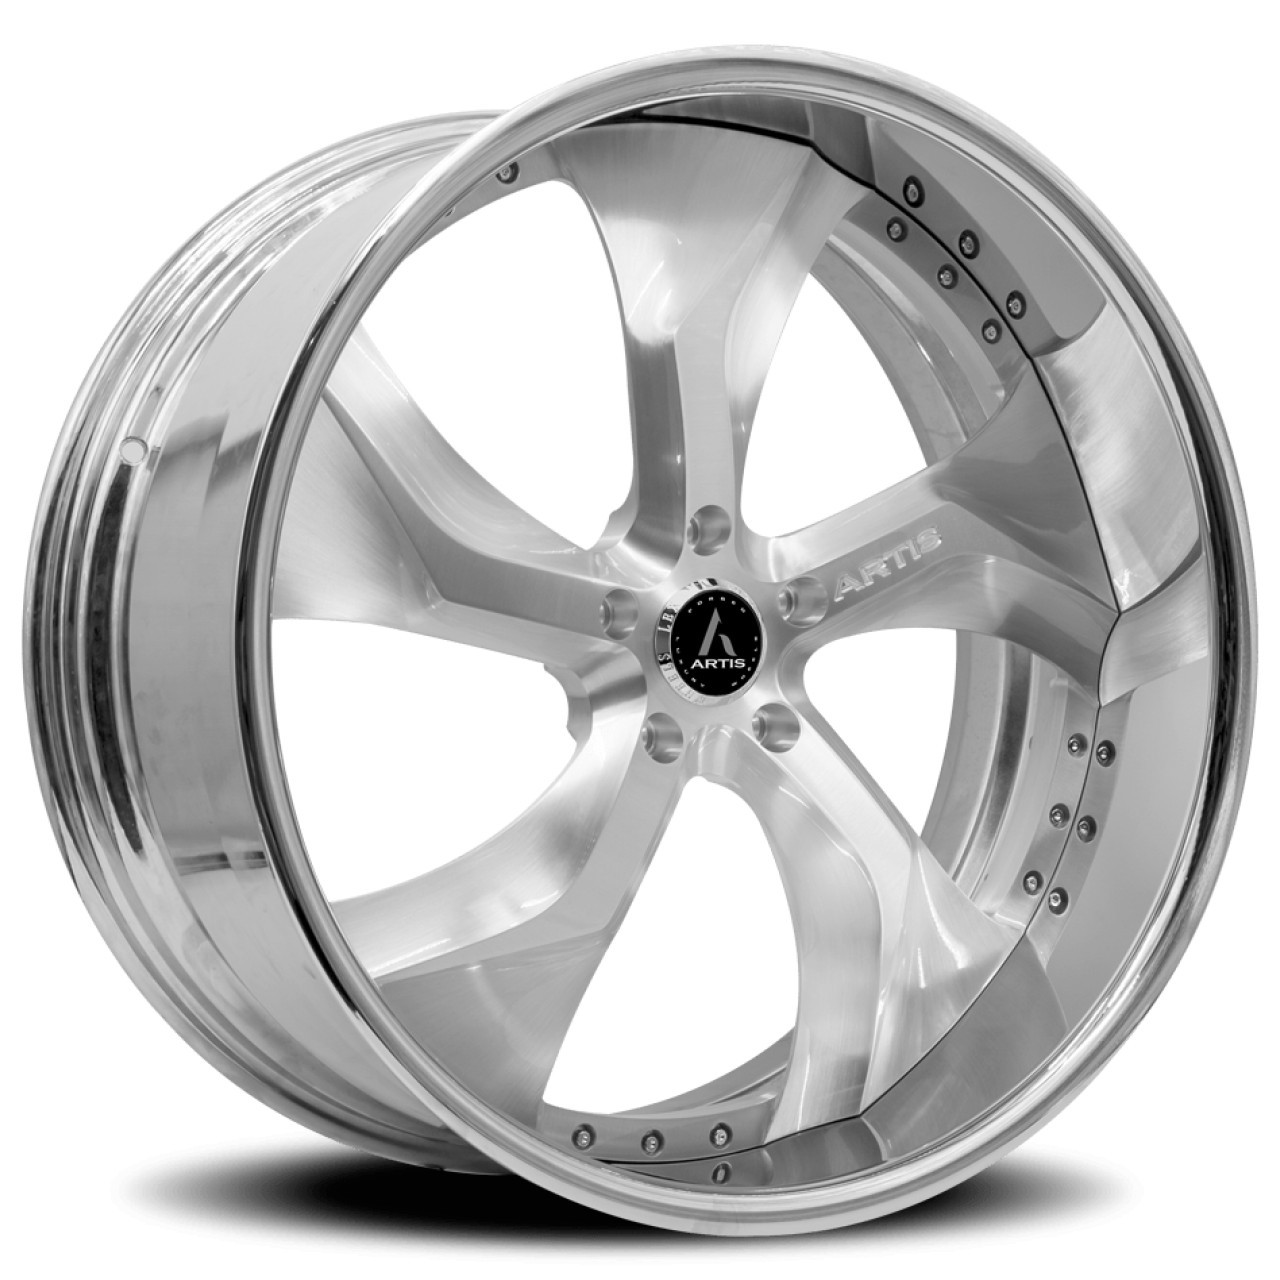 Artis Bully forged wheels